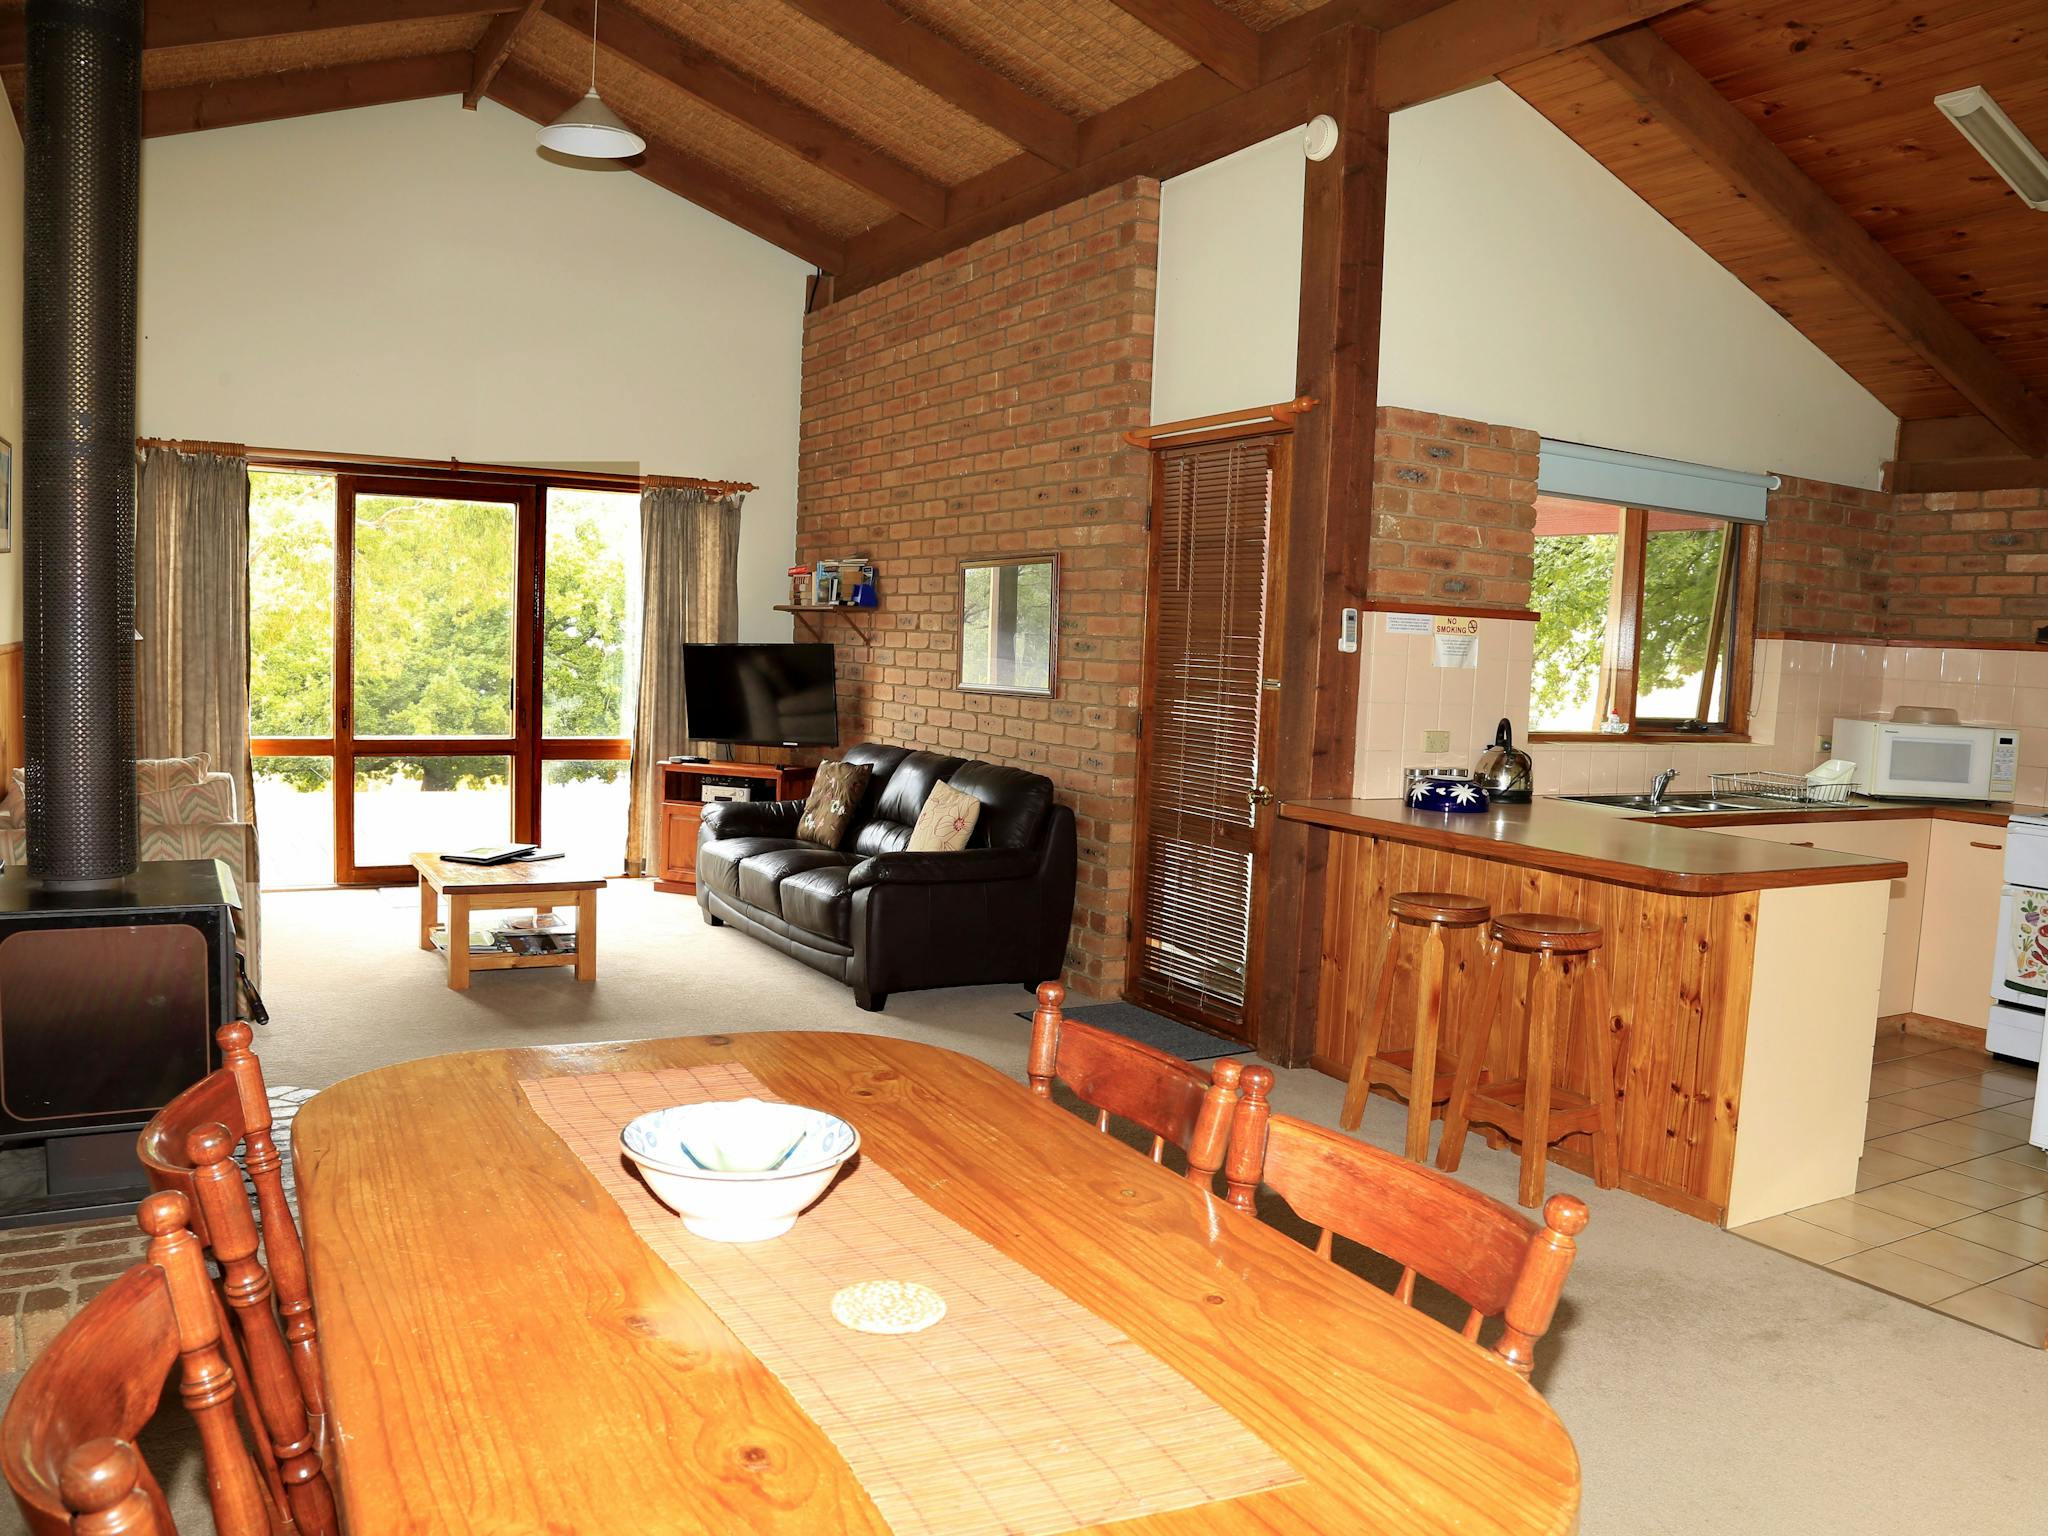 All four cottages have the same layout with spacious lounge-dining with flat screen television